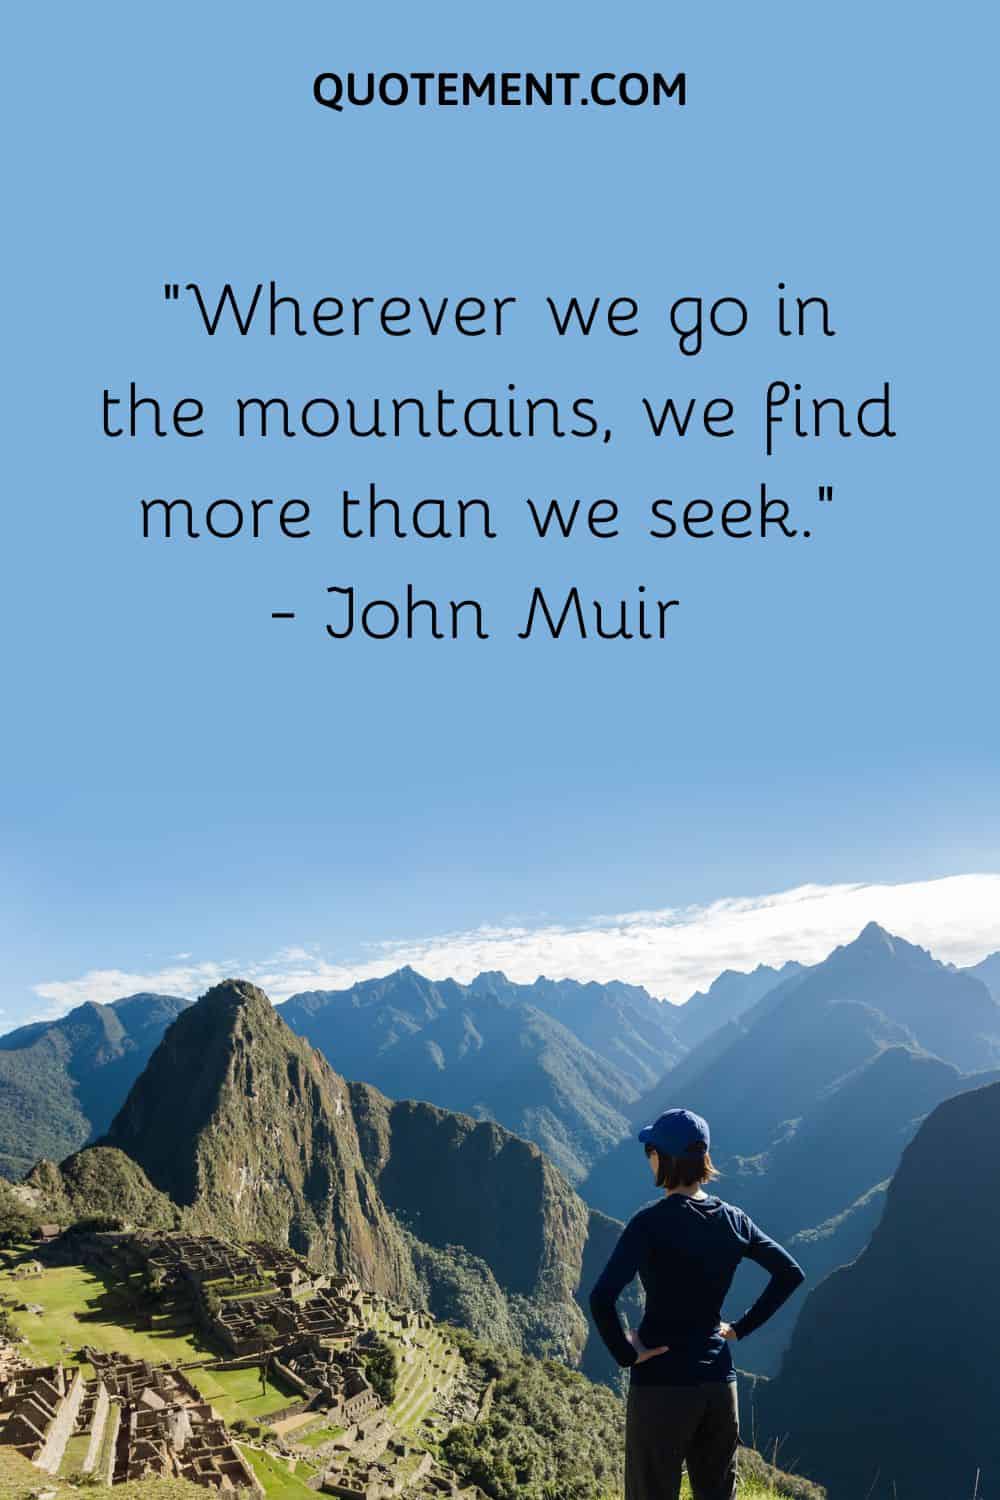 “Wherever we go in the mountains, we find more than we seek.” — John Muir